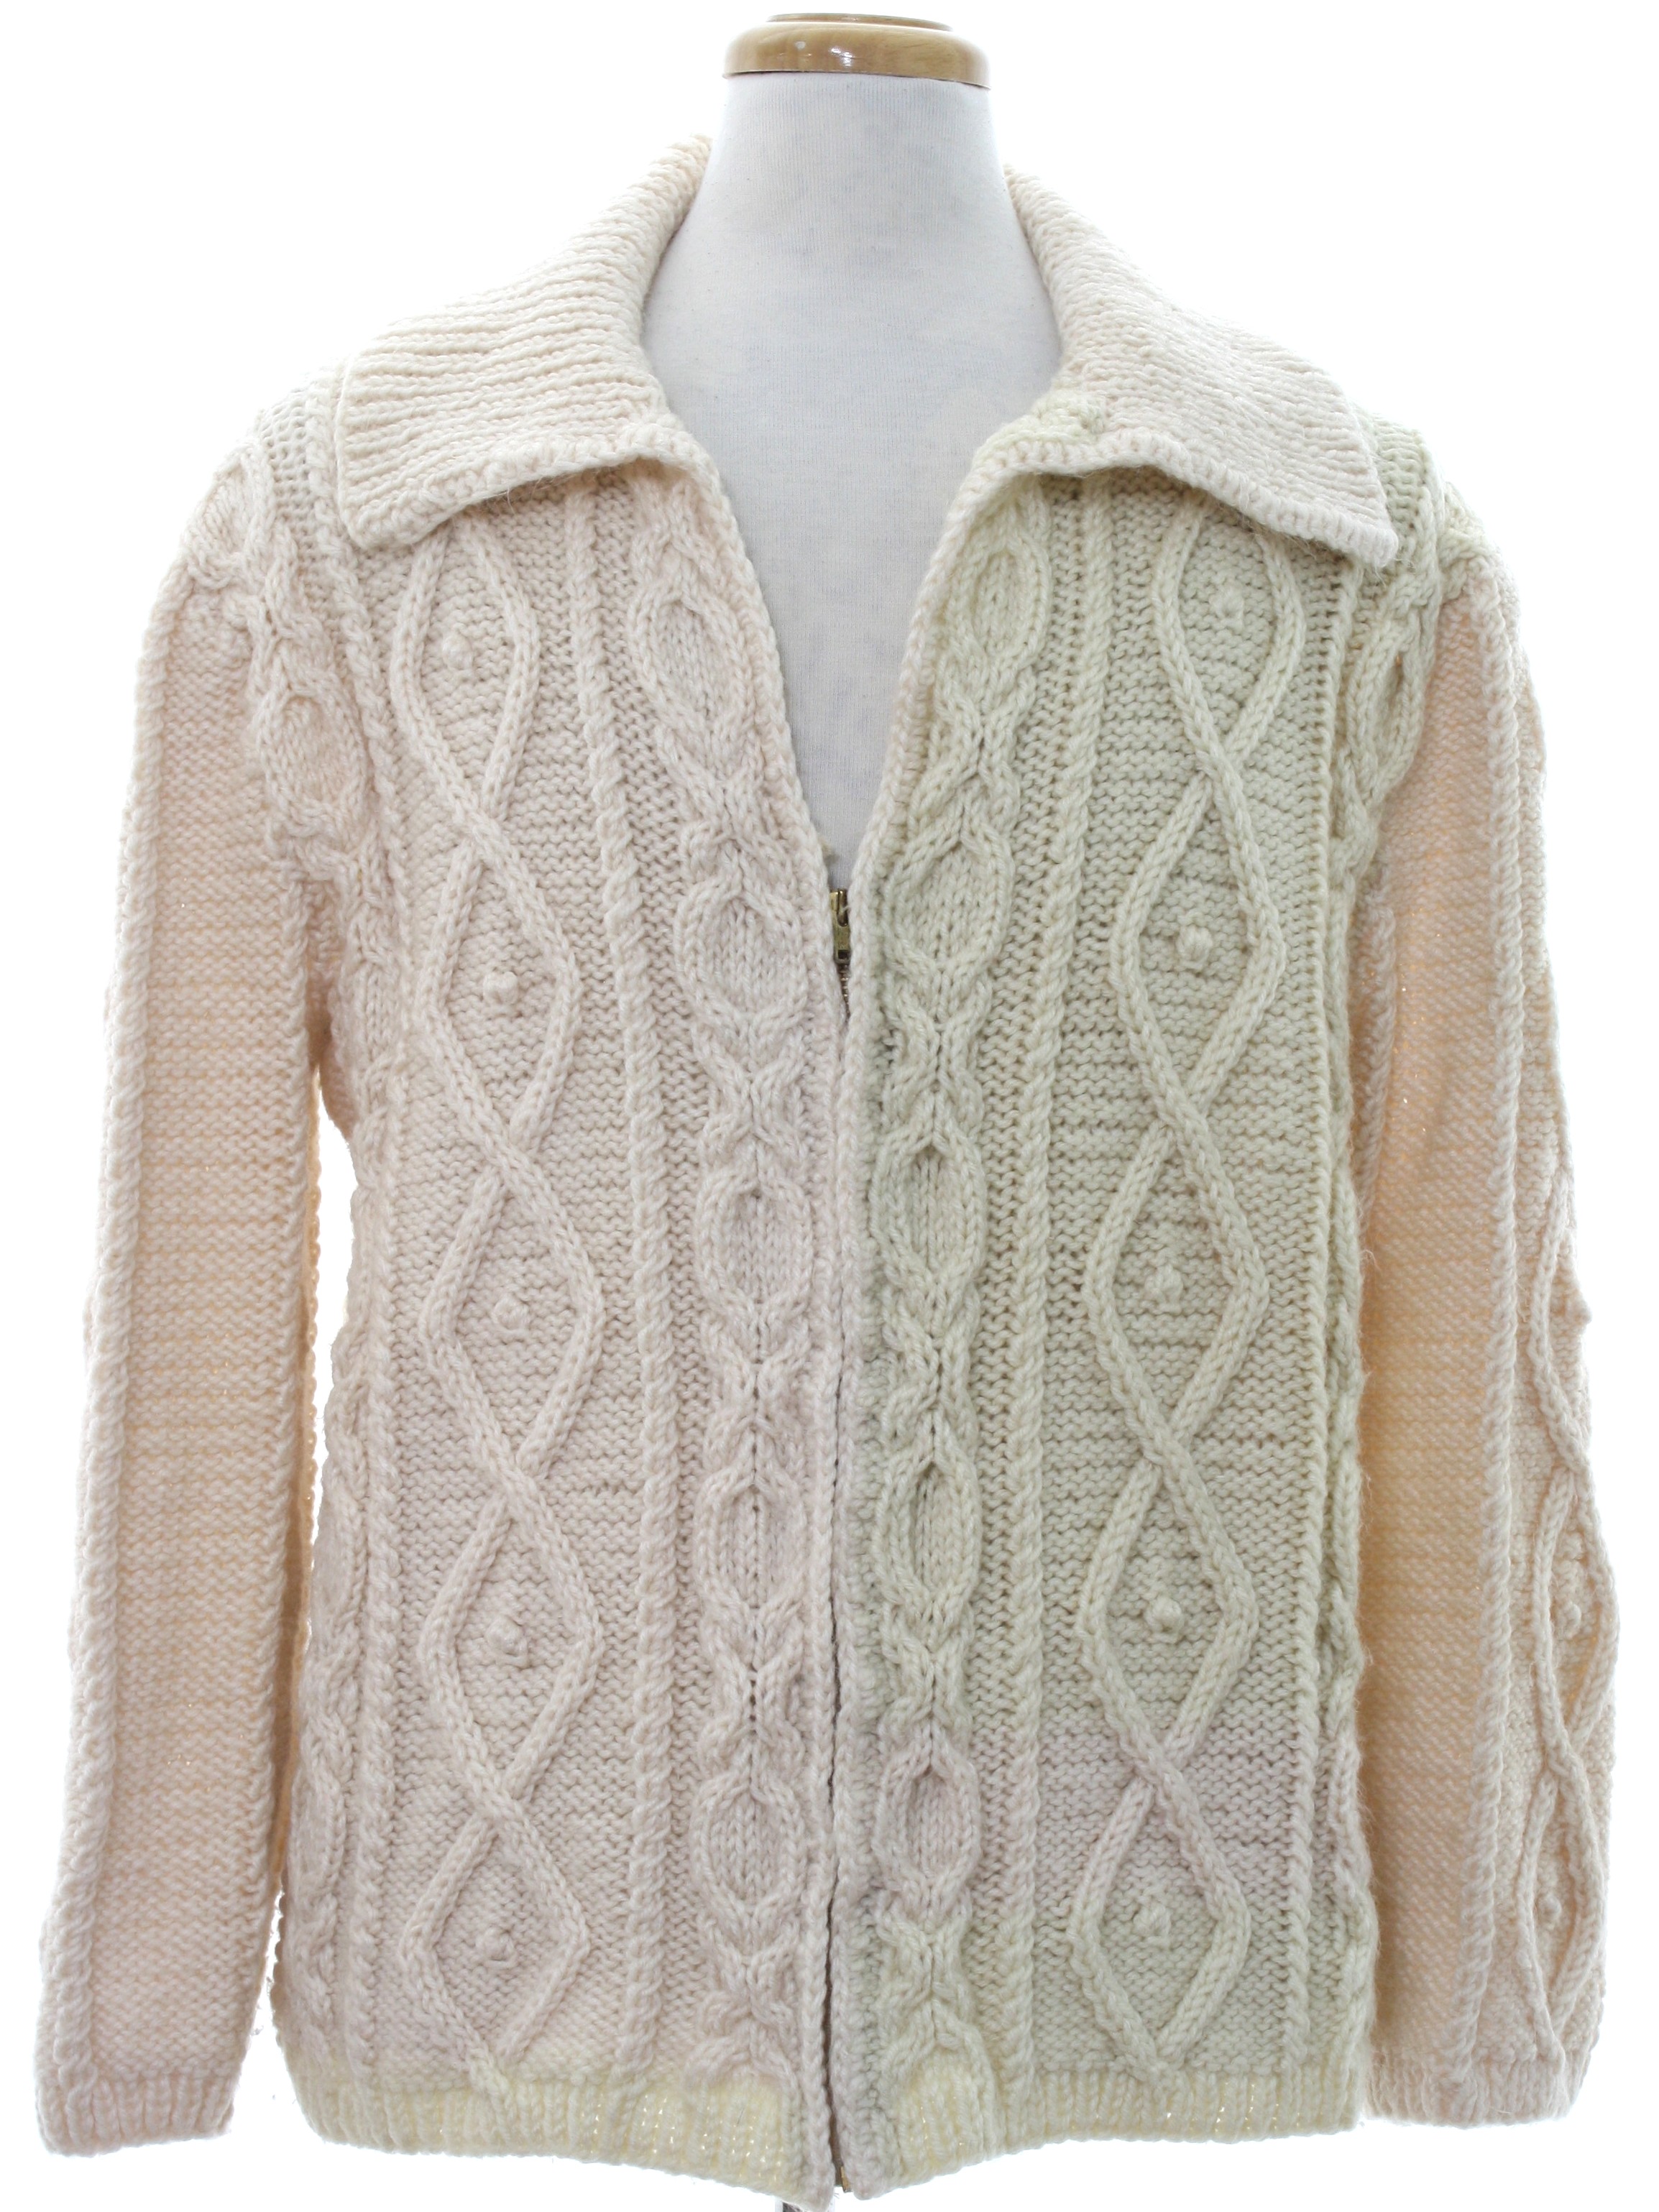 Vintage (Hand Knit) 70's Sweater: 70s -(Hand Knit)- Mens ivory ...